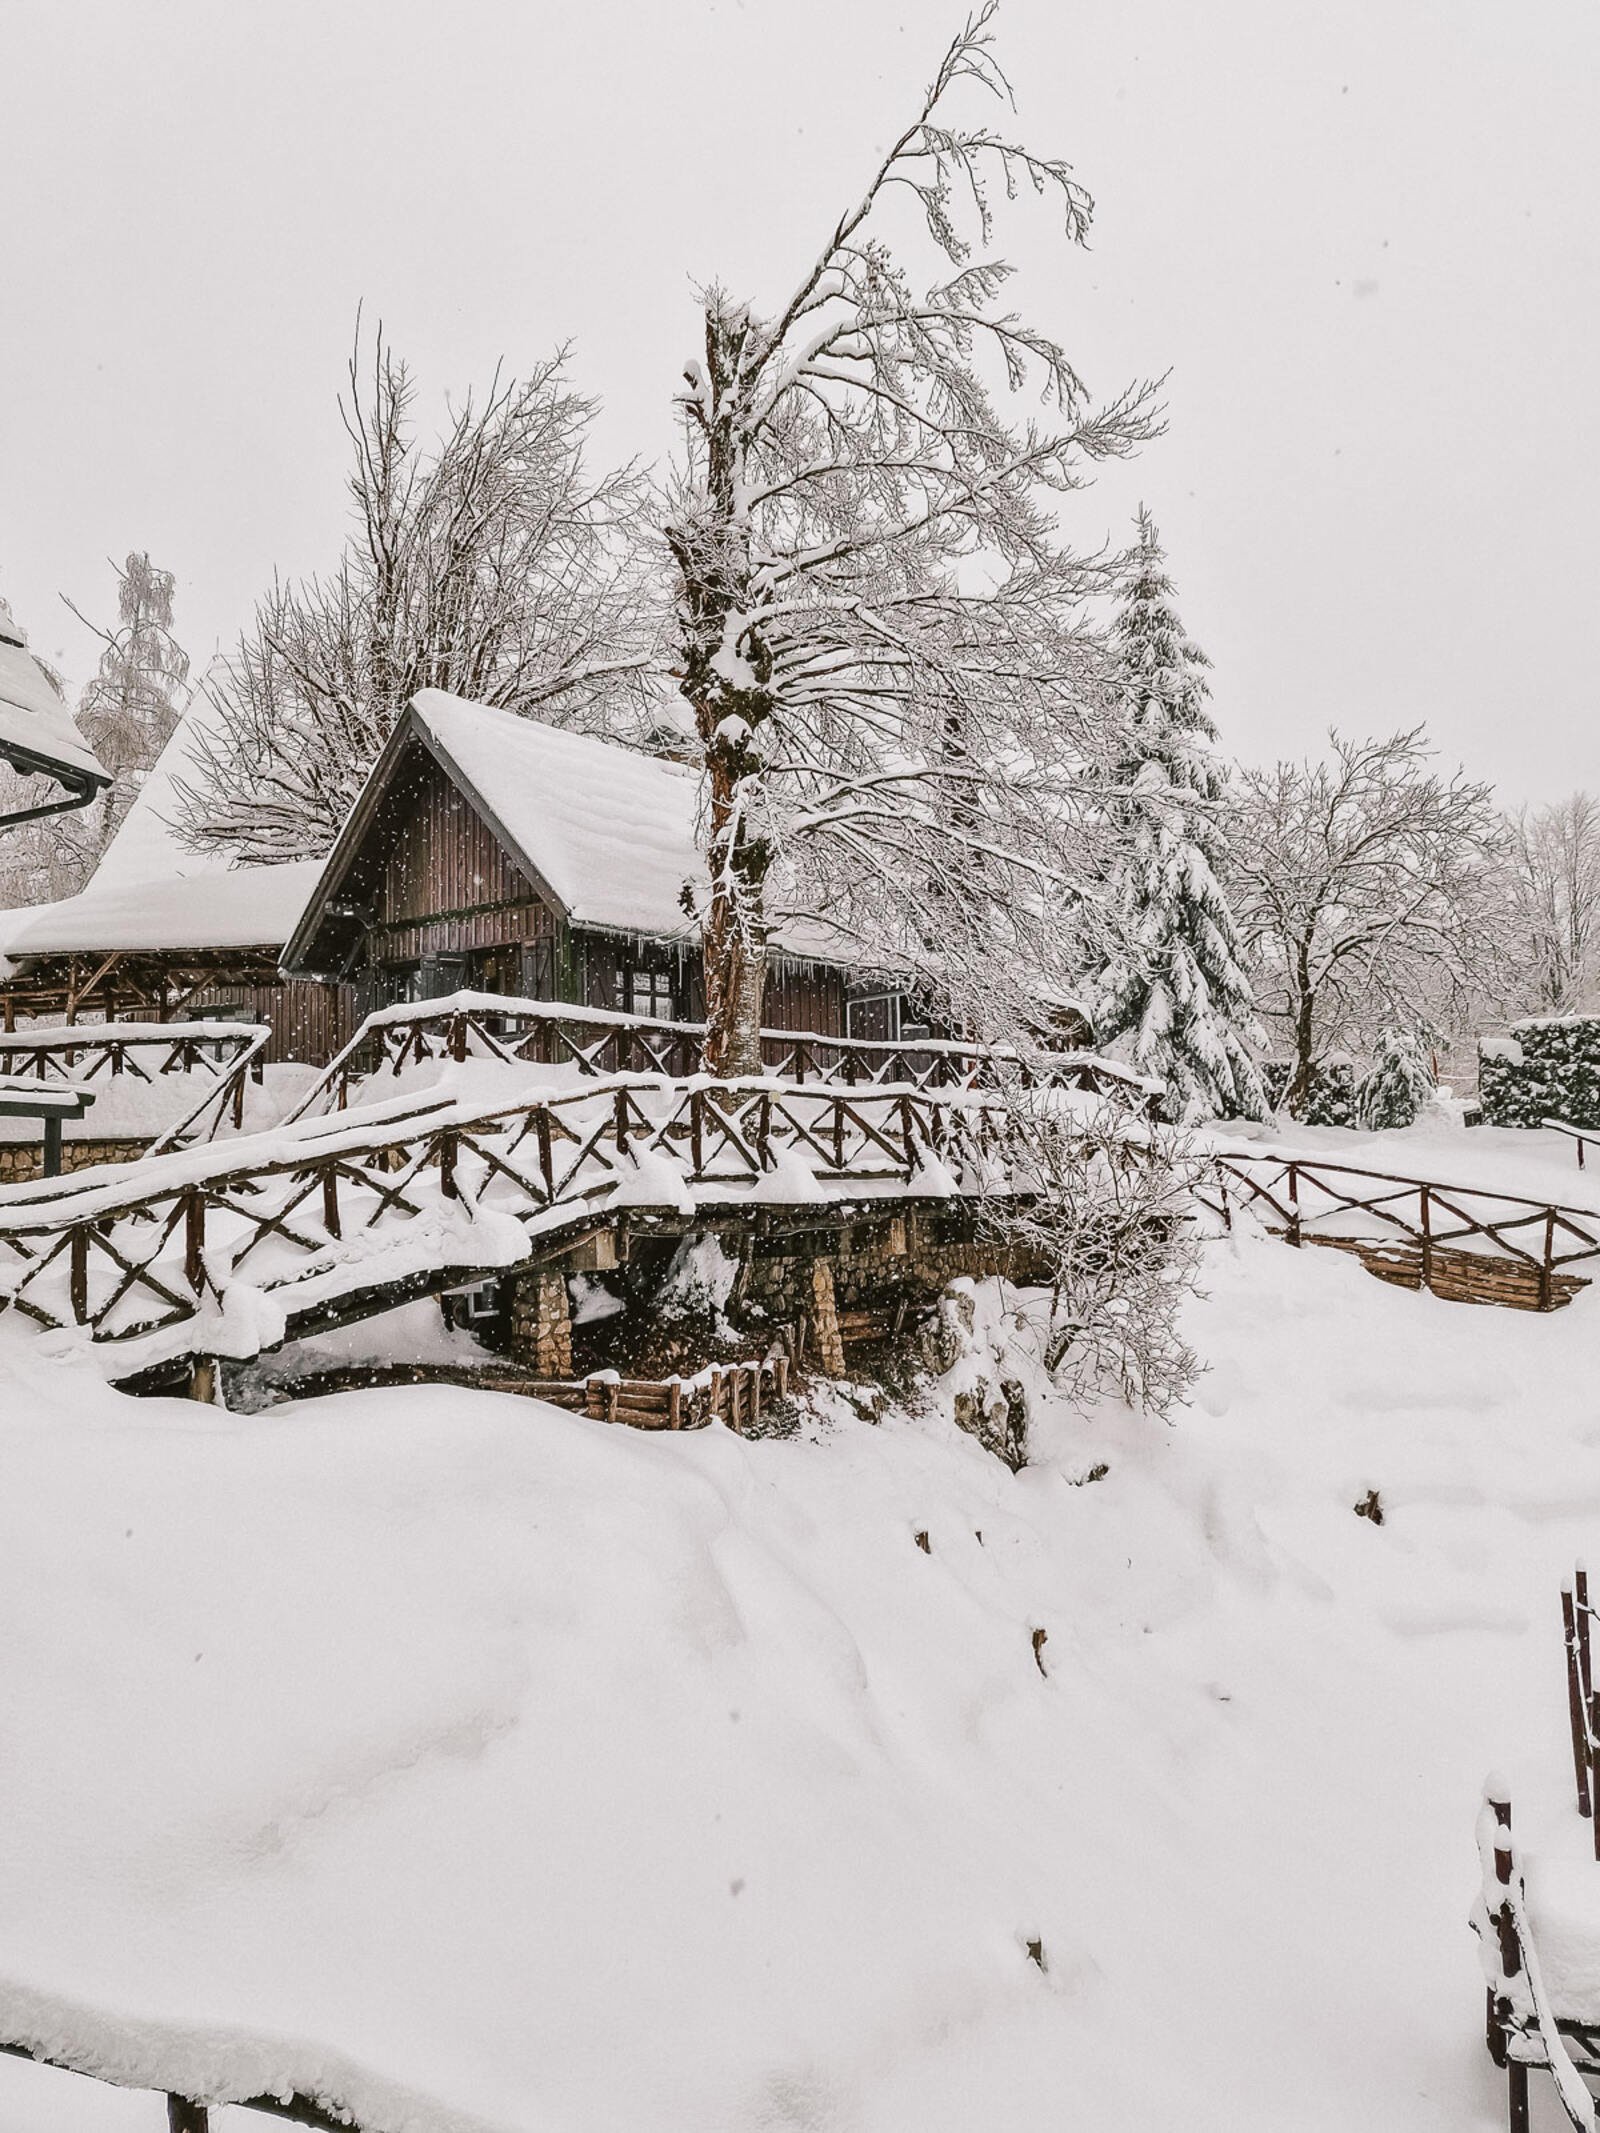 Plitvice hotel ethno houses, wooden cabin style building with a wooden fence running alongside with deep snow around it, snow covered roof, snow covered trees and snow falling in the photo